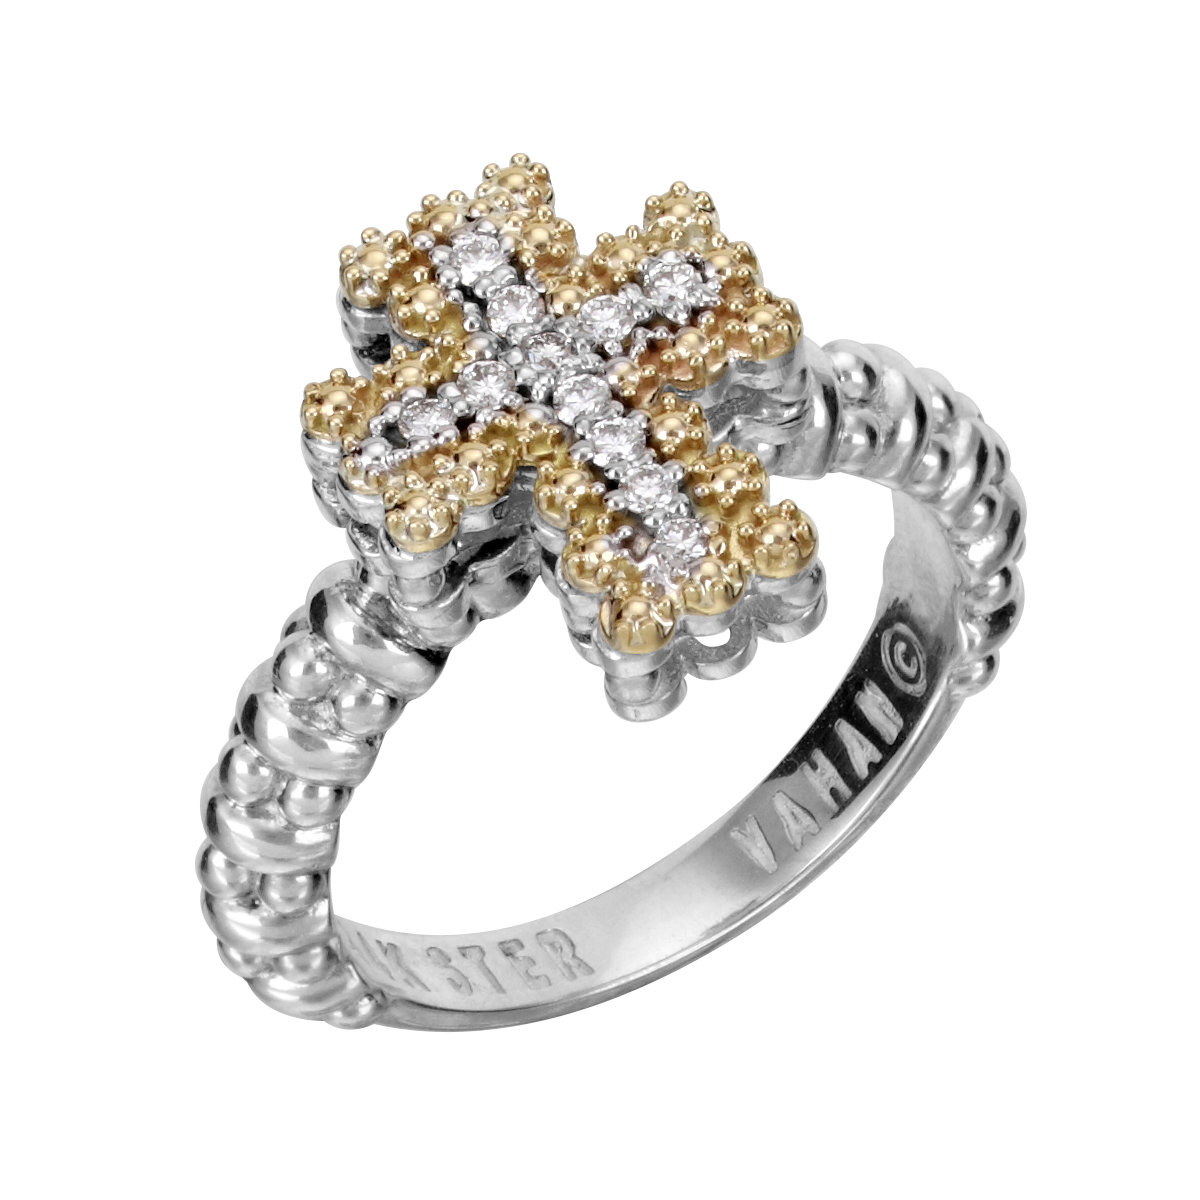 Vahan Cross Sterling Silver & Yellow Gold Diamond Fashion Ring Storey Jewelers Gonzales, TX